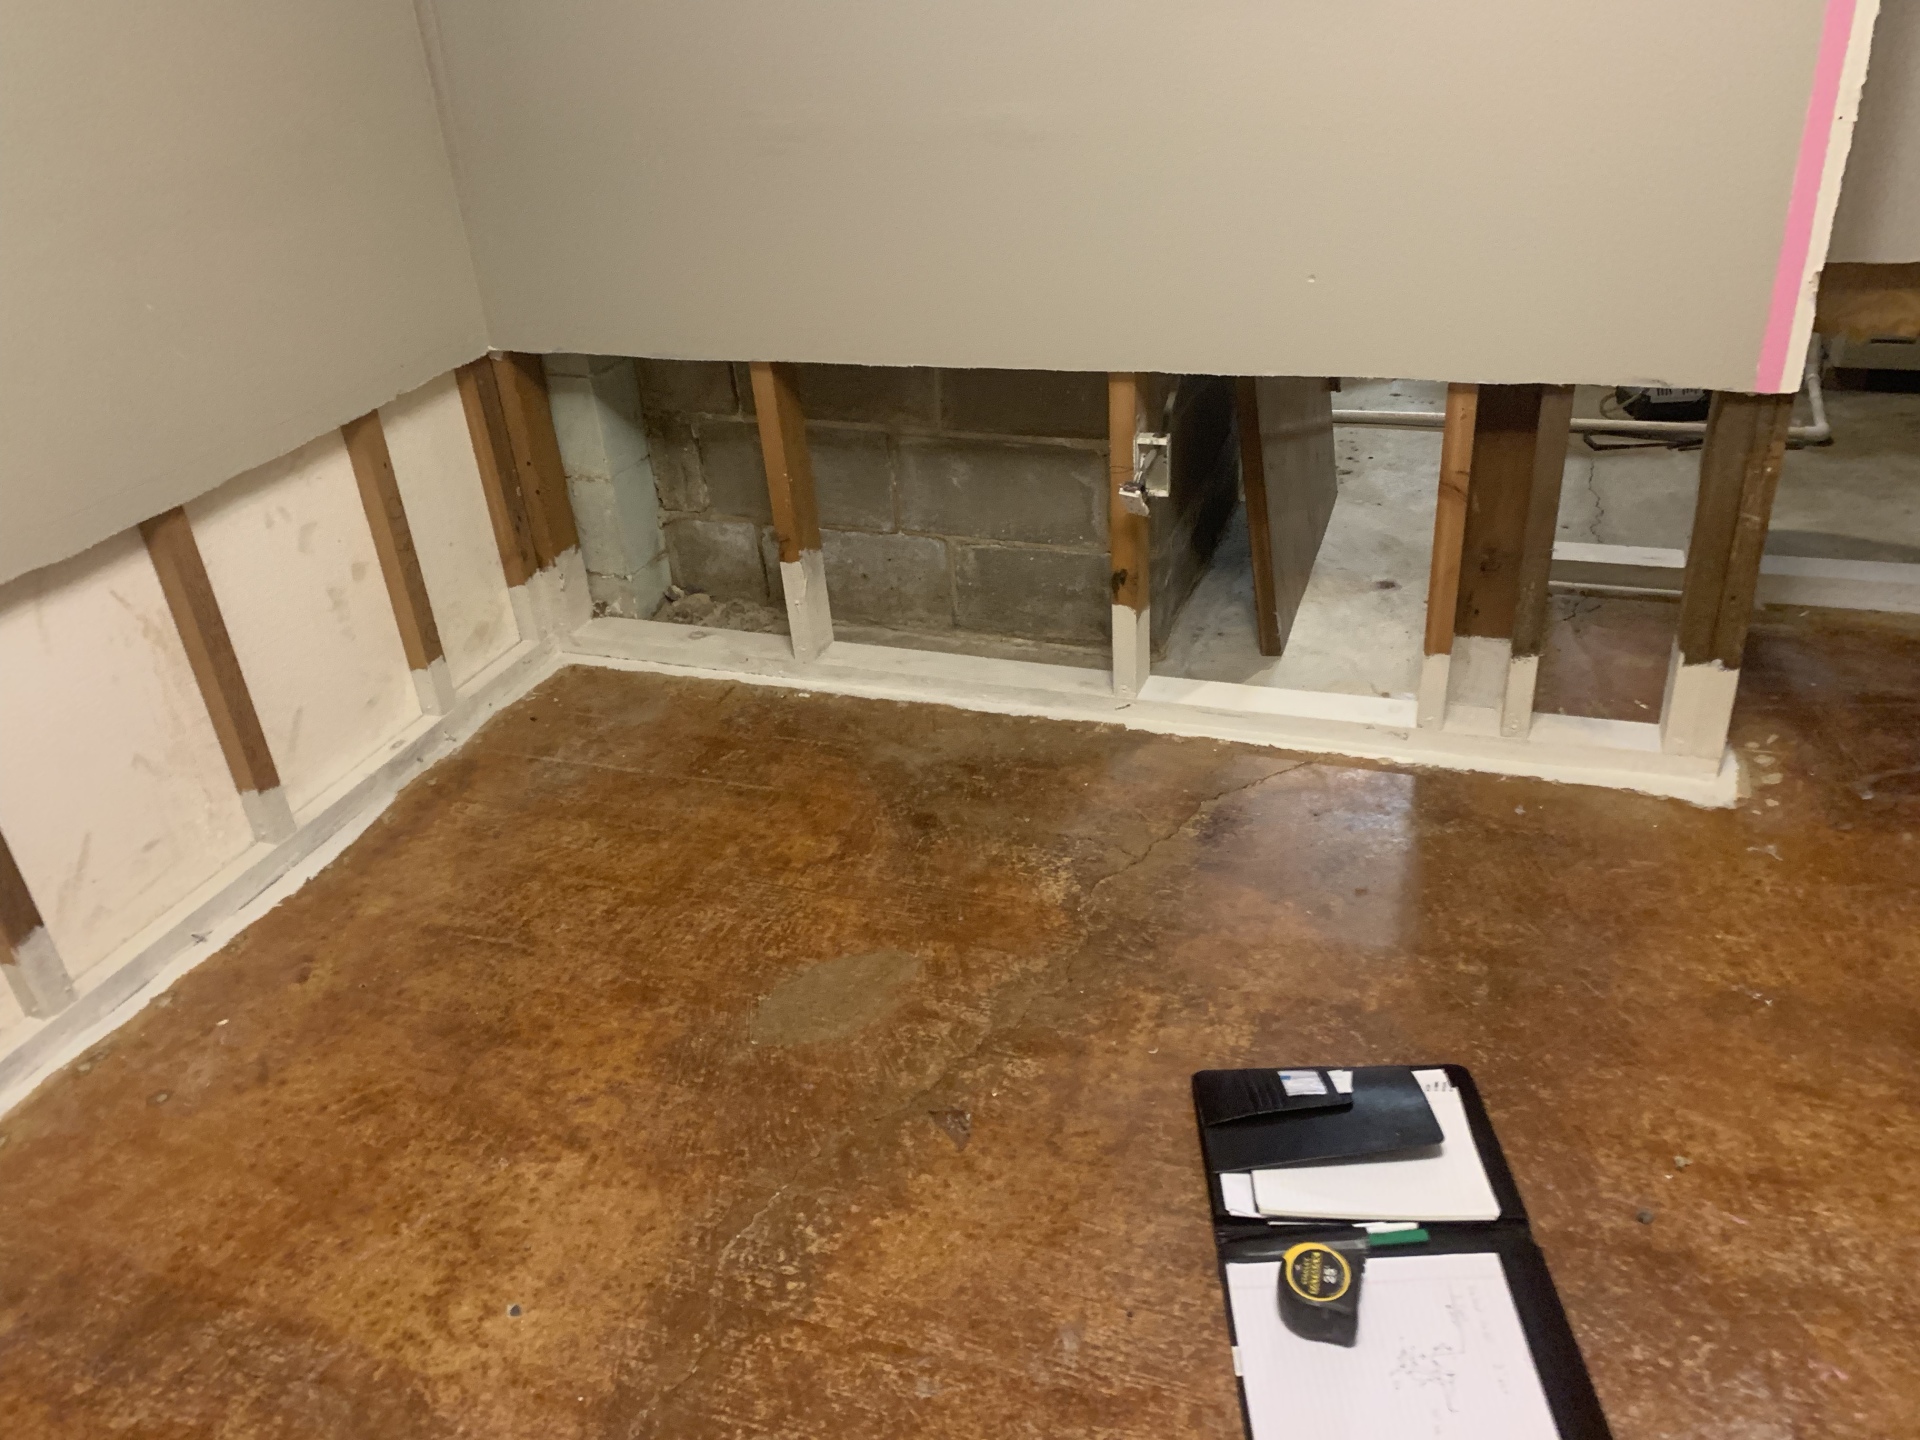 Drywall Repair Due to Flooded Basement